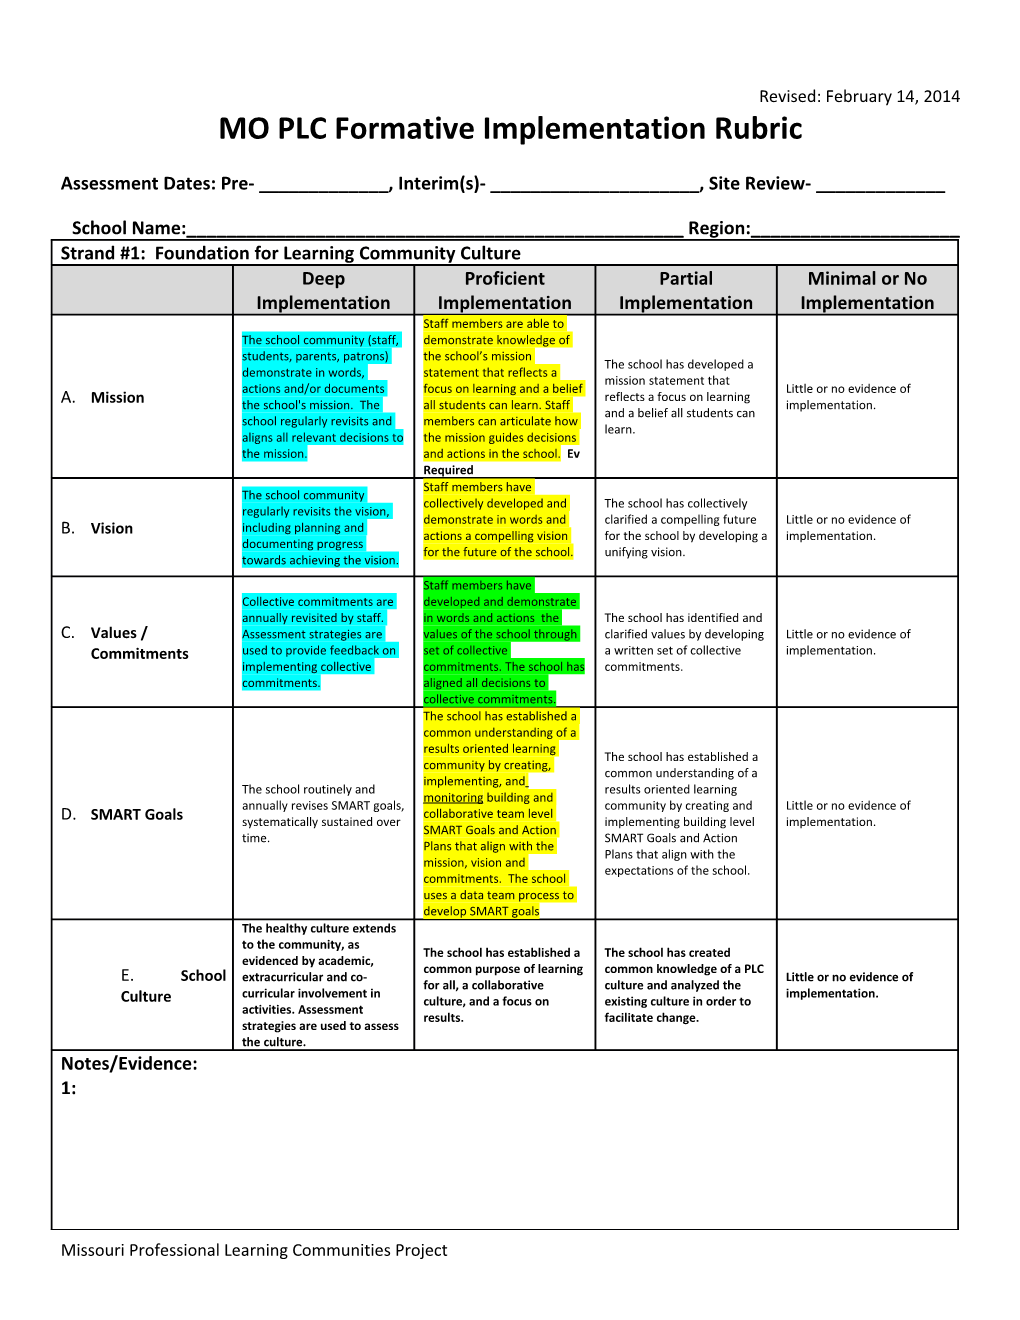 MO PLC Formative Implementation Rubric